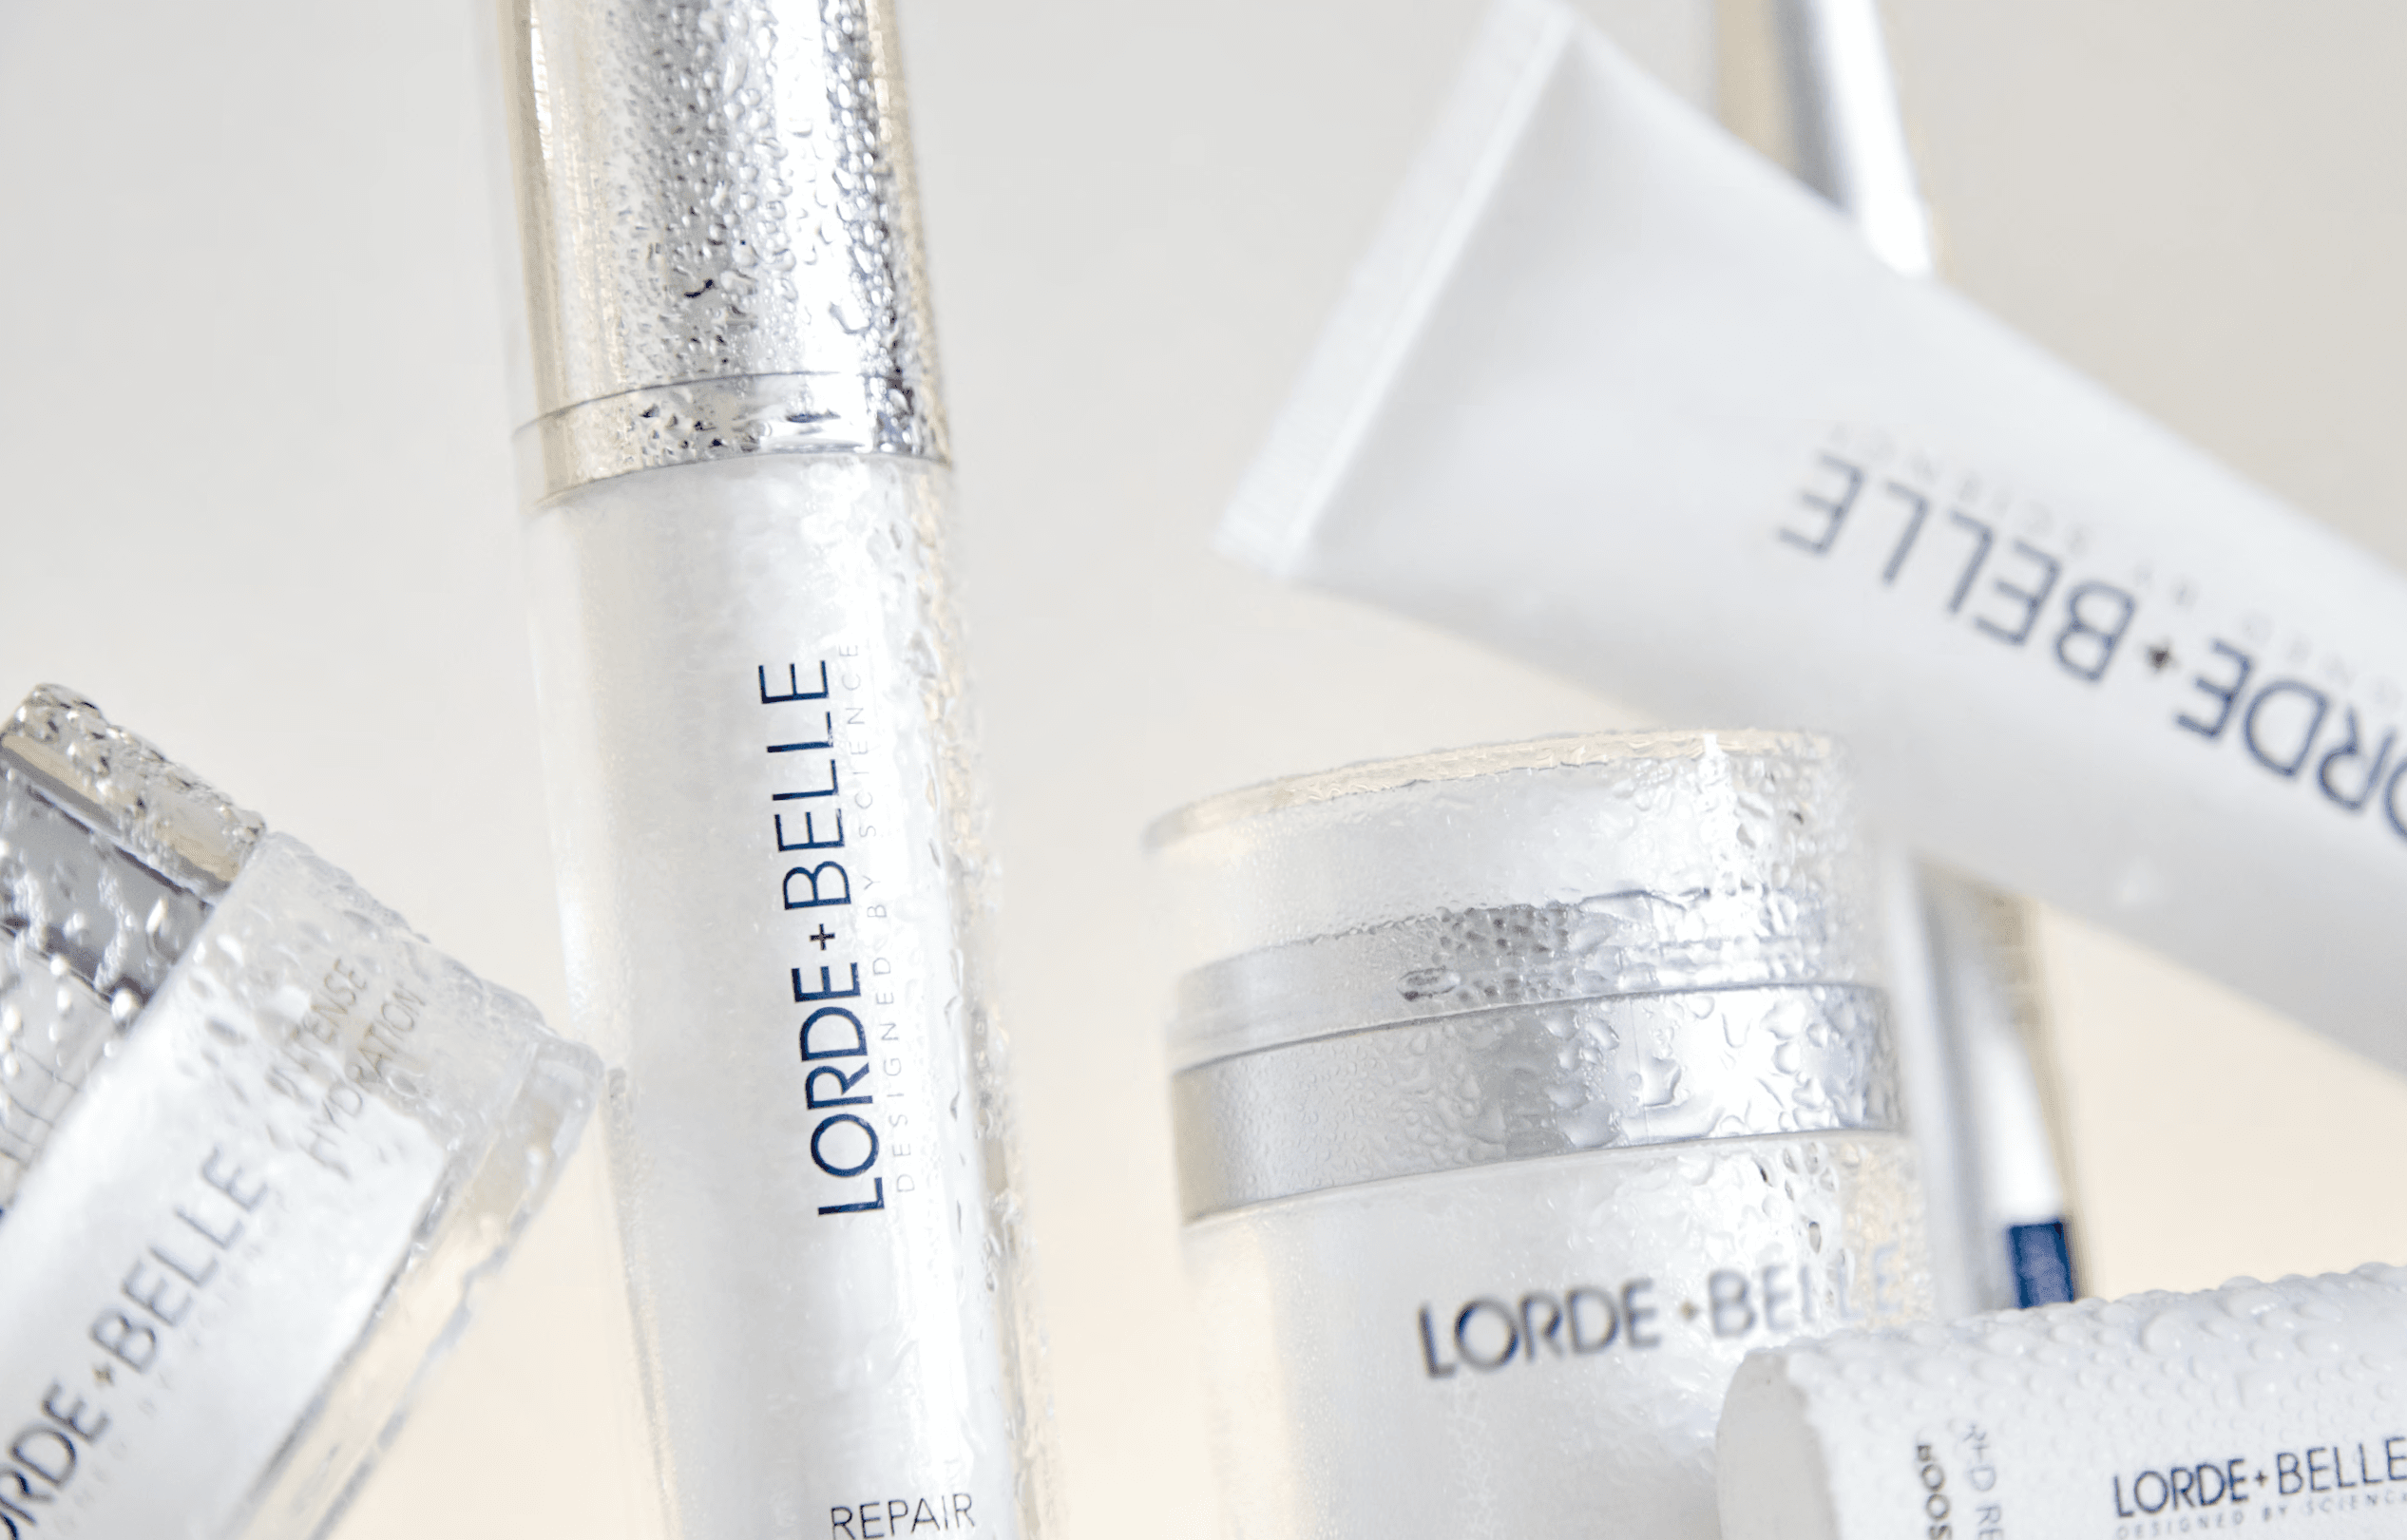 Lorde + Belle’s Nano-Channeling RegenPen™ Is The Anti-Aging Facial Tool You’ve Been Waiting For